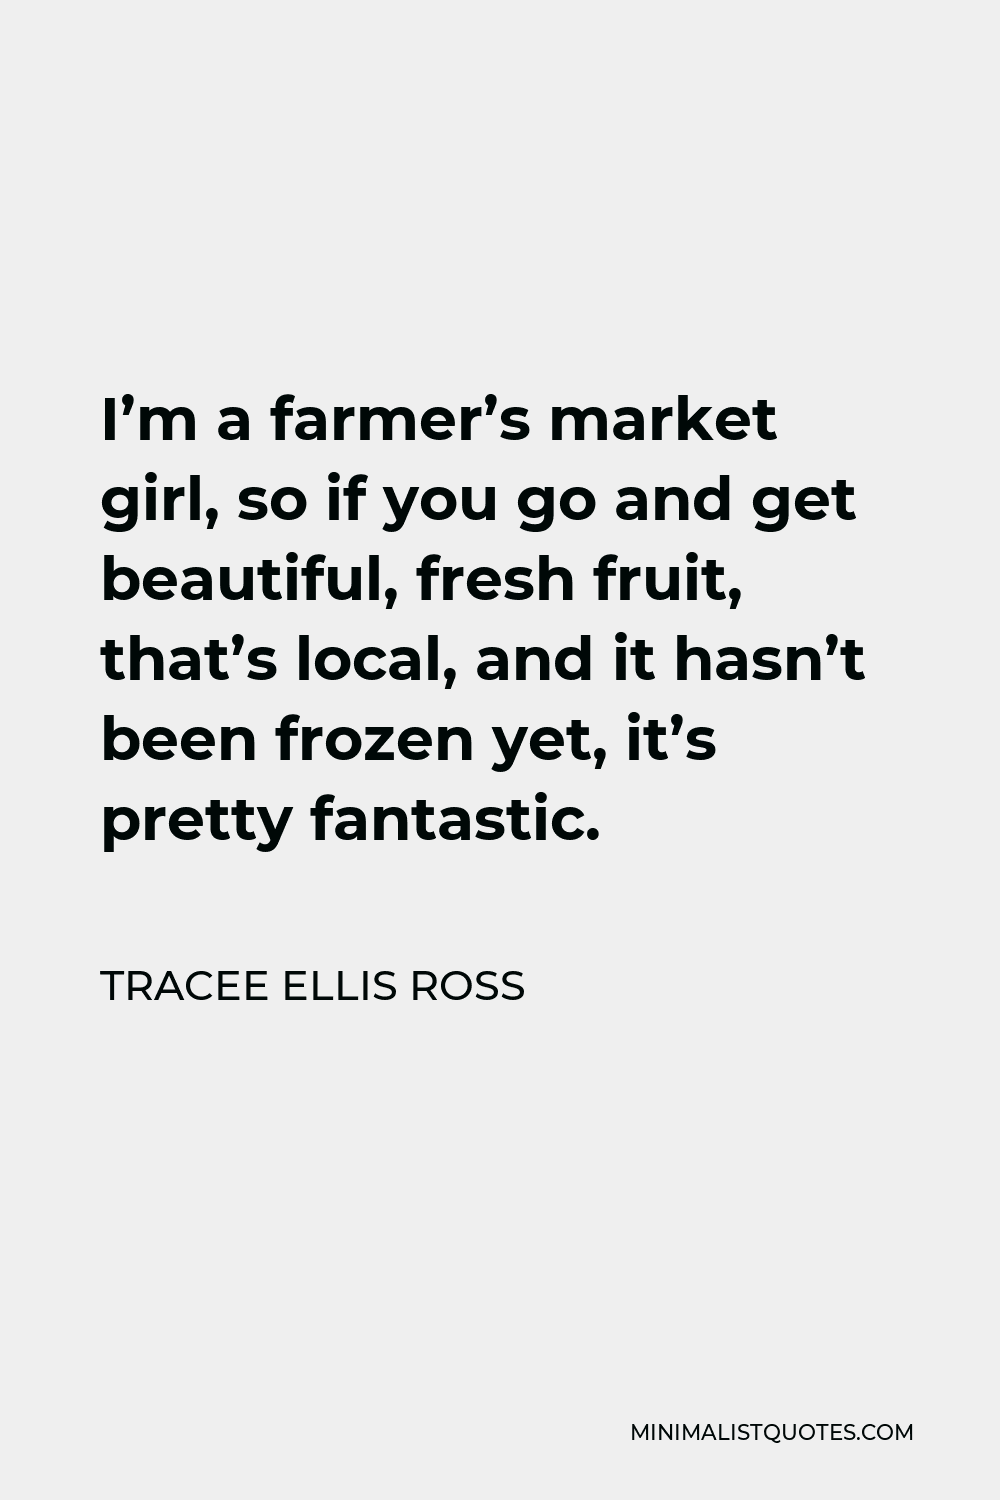 Tracee Ellis Ross Quote - I’m a farmer’s market girl, so if you go and get beautiful, fresh fruit, that’s local, and it hasn’t been frozen yet, it’s pretty fantastic.